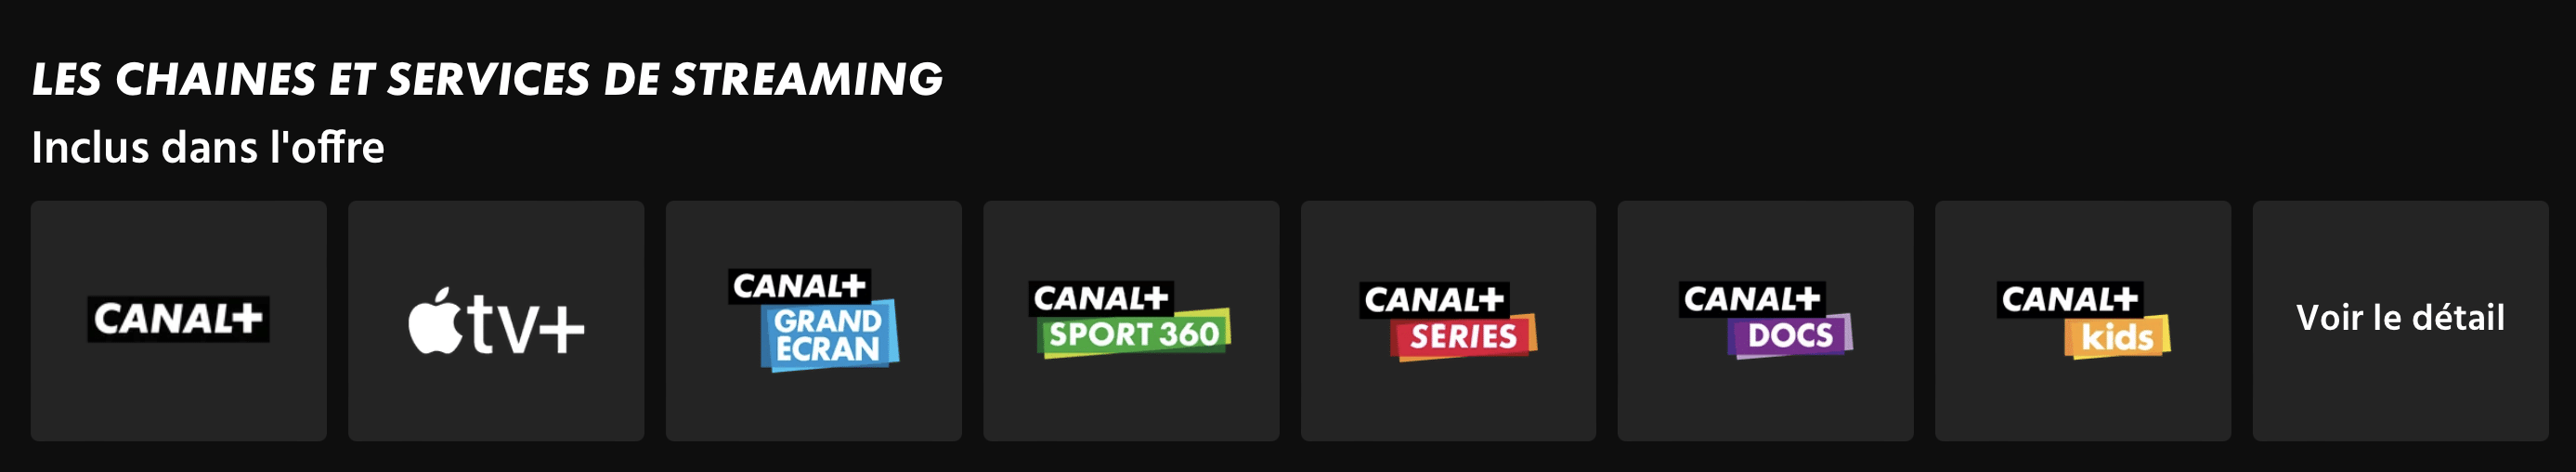 Canal+ offre